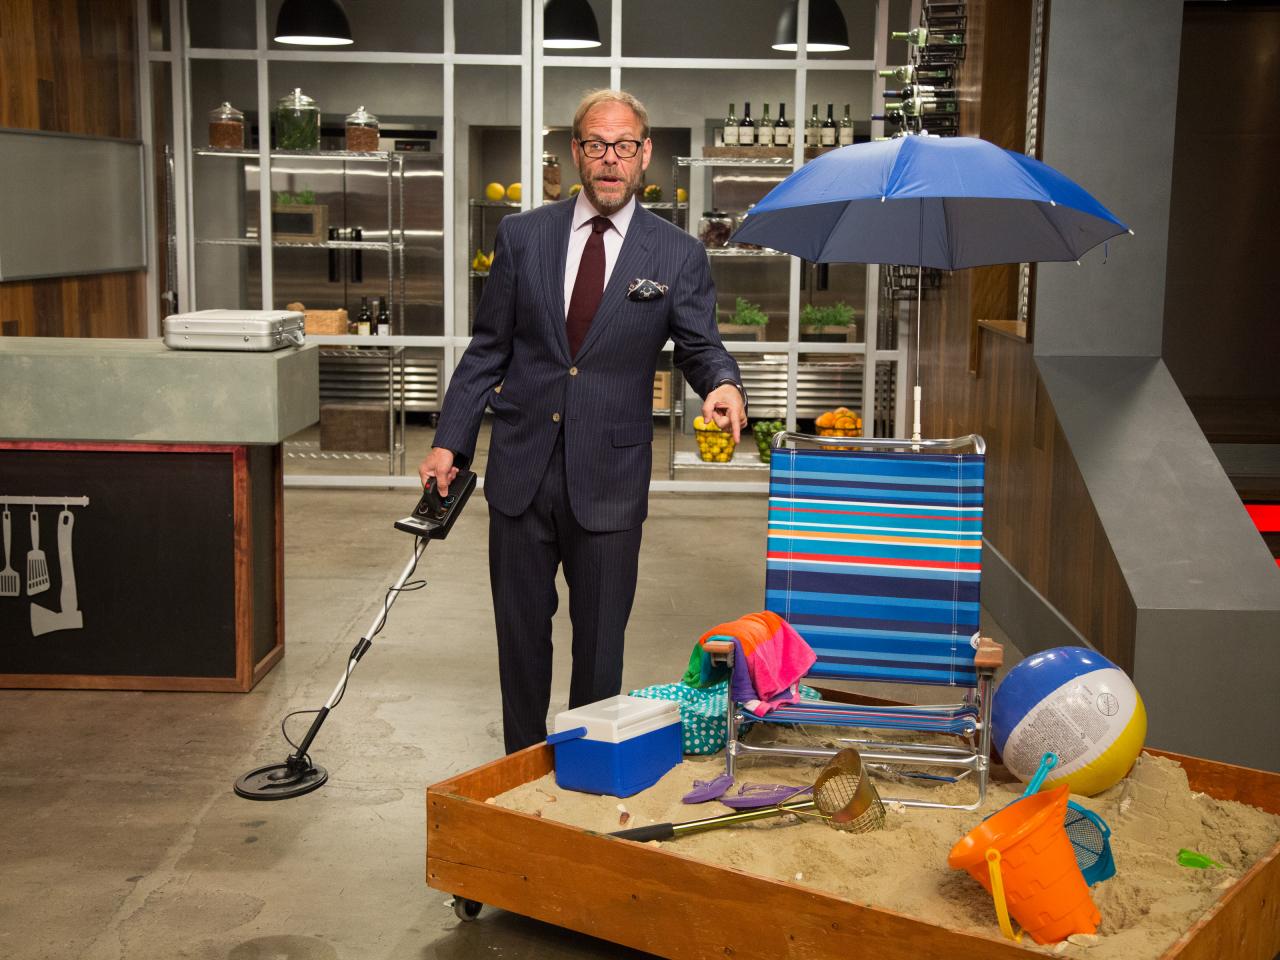 Catapult  Alton Brown Made Cooking More Approachable, One Prop at a